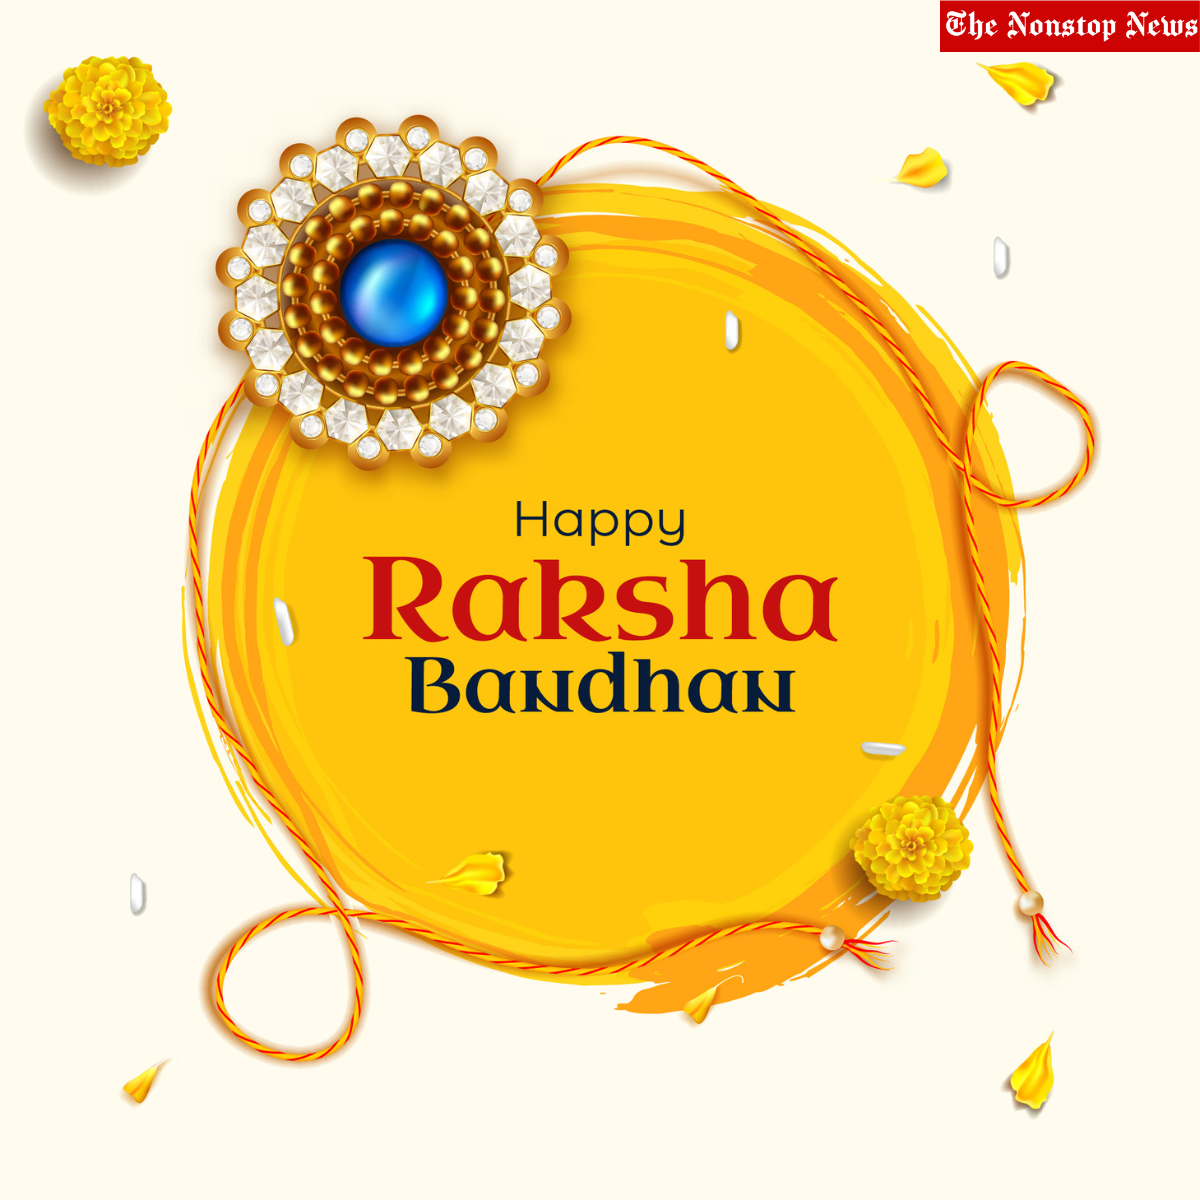 Happy Raksha Bandhan 2022: HD Images, Greetings, Messages, Wishes, Posters, and Quotes to Share